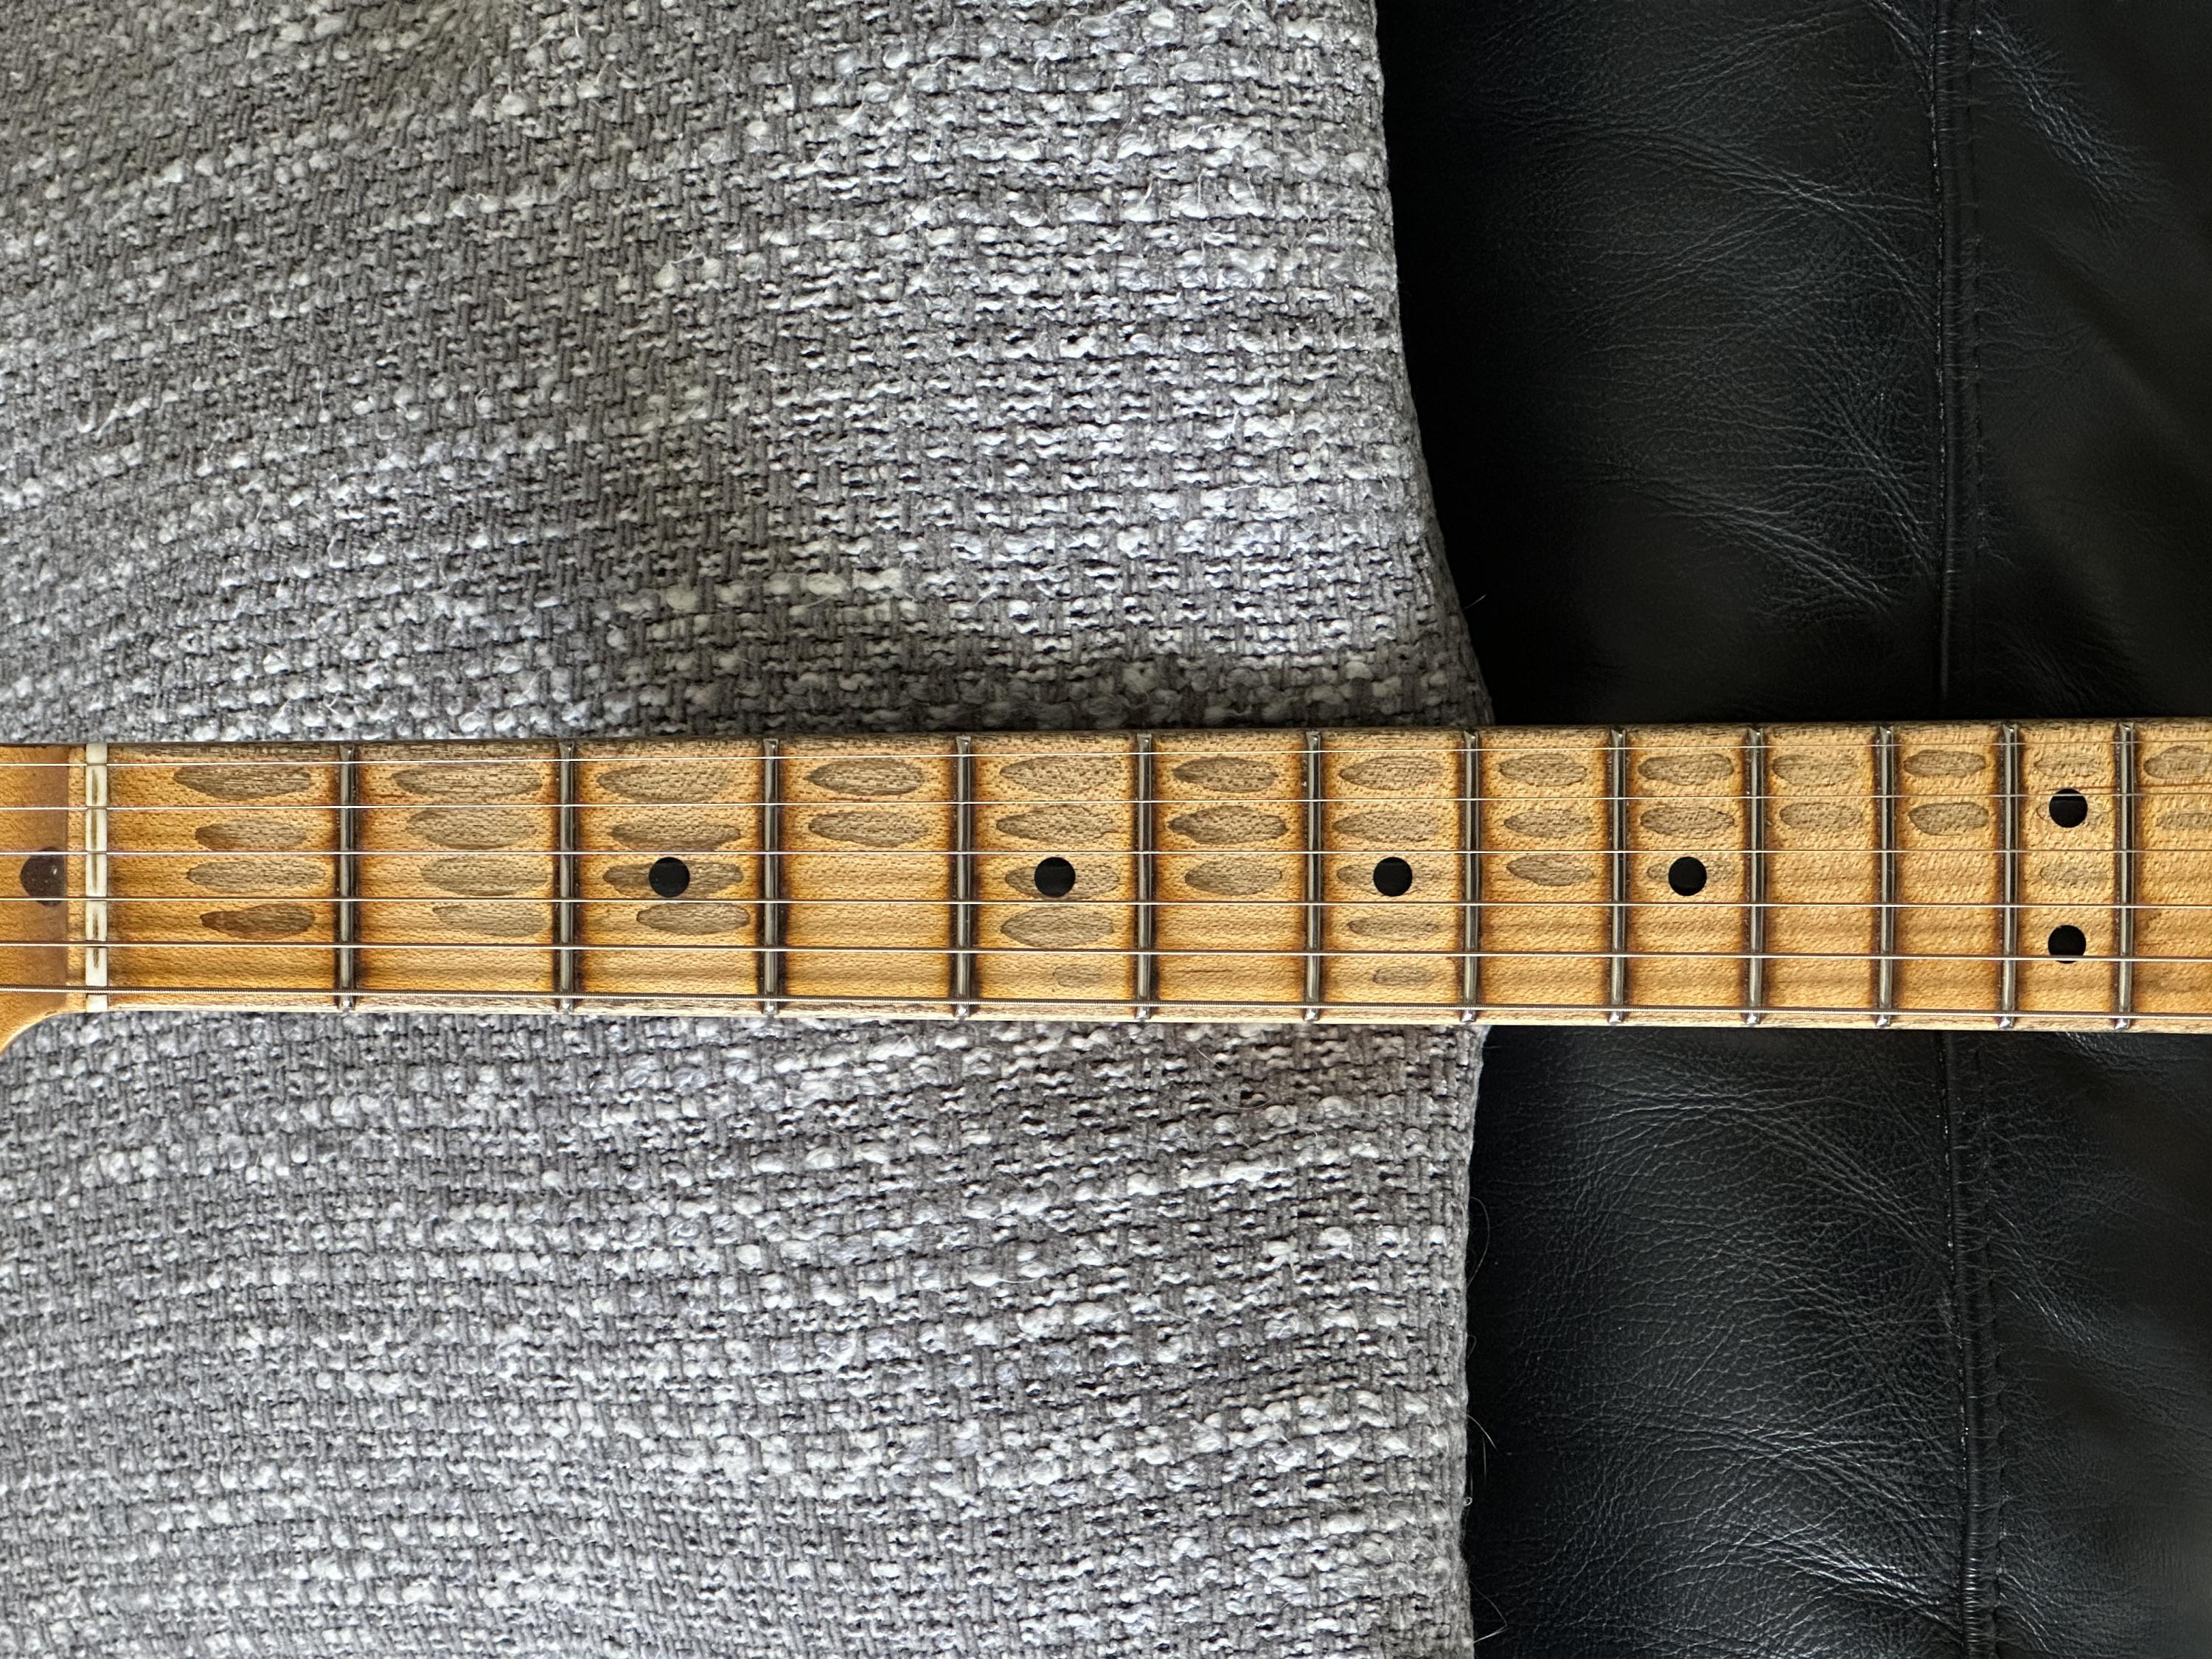 Telecaster Love Thread, No Archtops Allowed-2aef9854-b401-417d-a529-815dabff3903-jpg